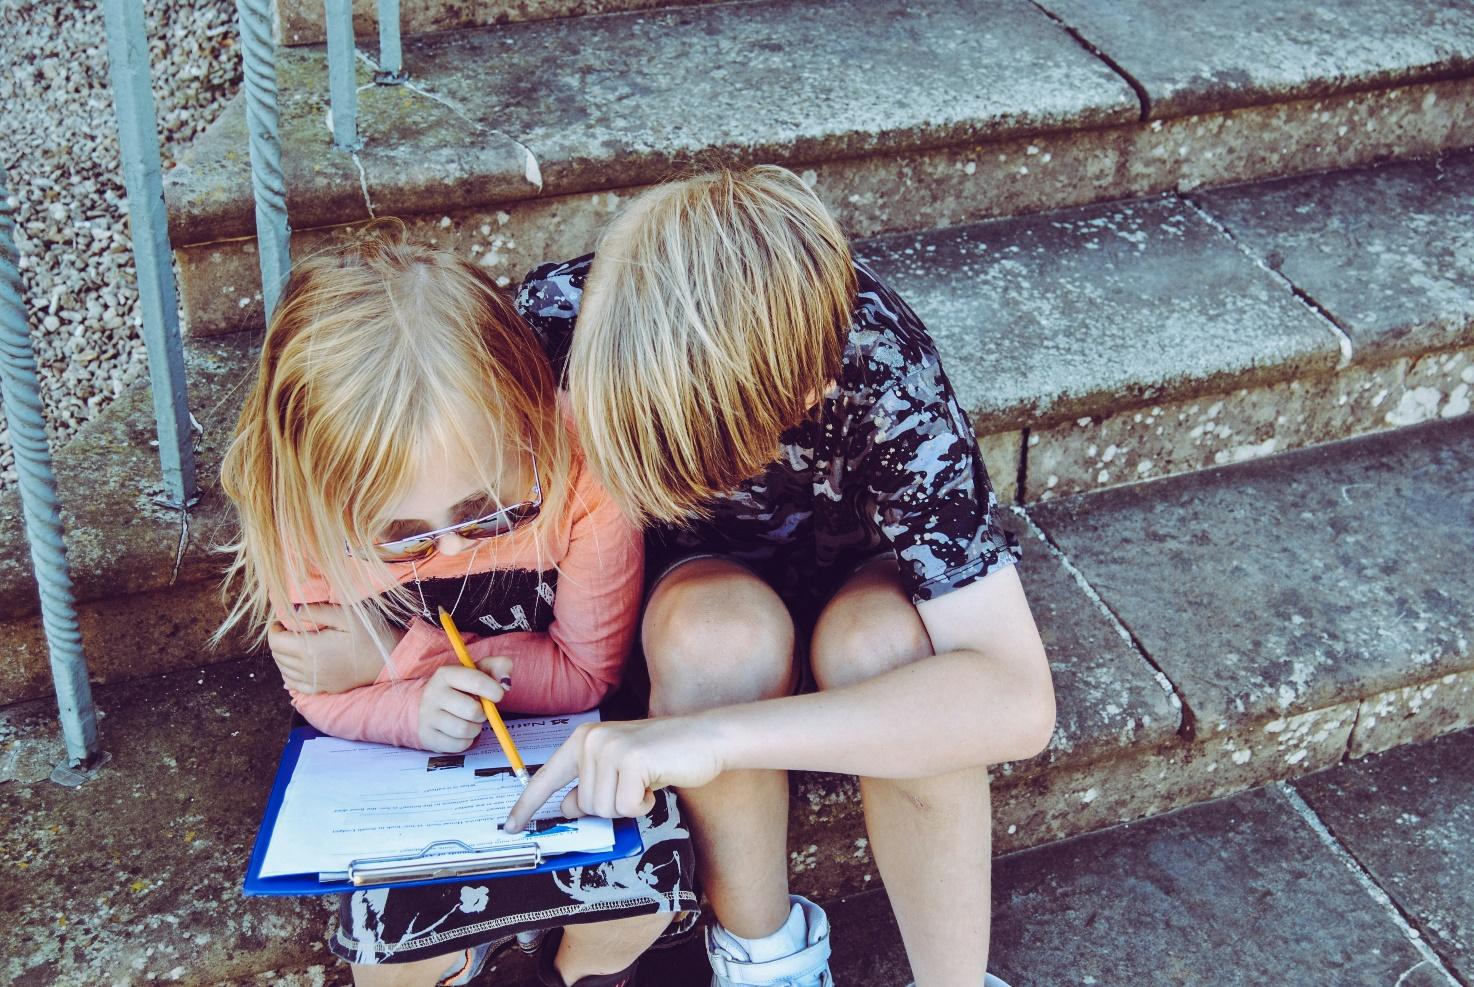 A child and child sitting on steps writing on a book

Description automatically generated